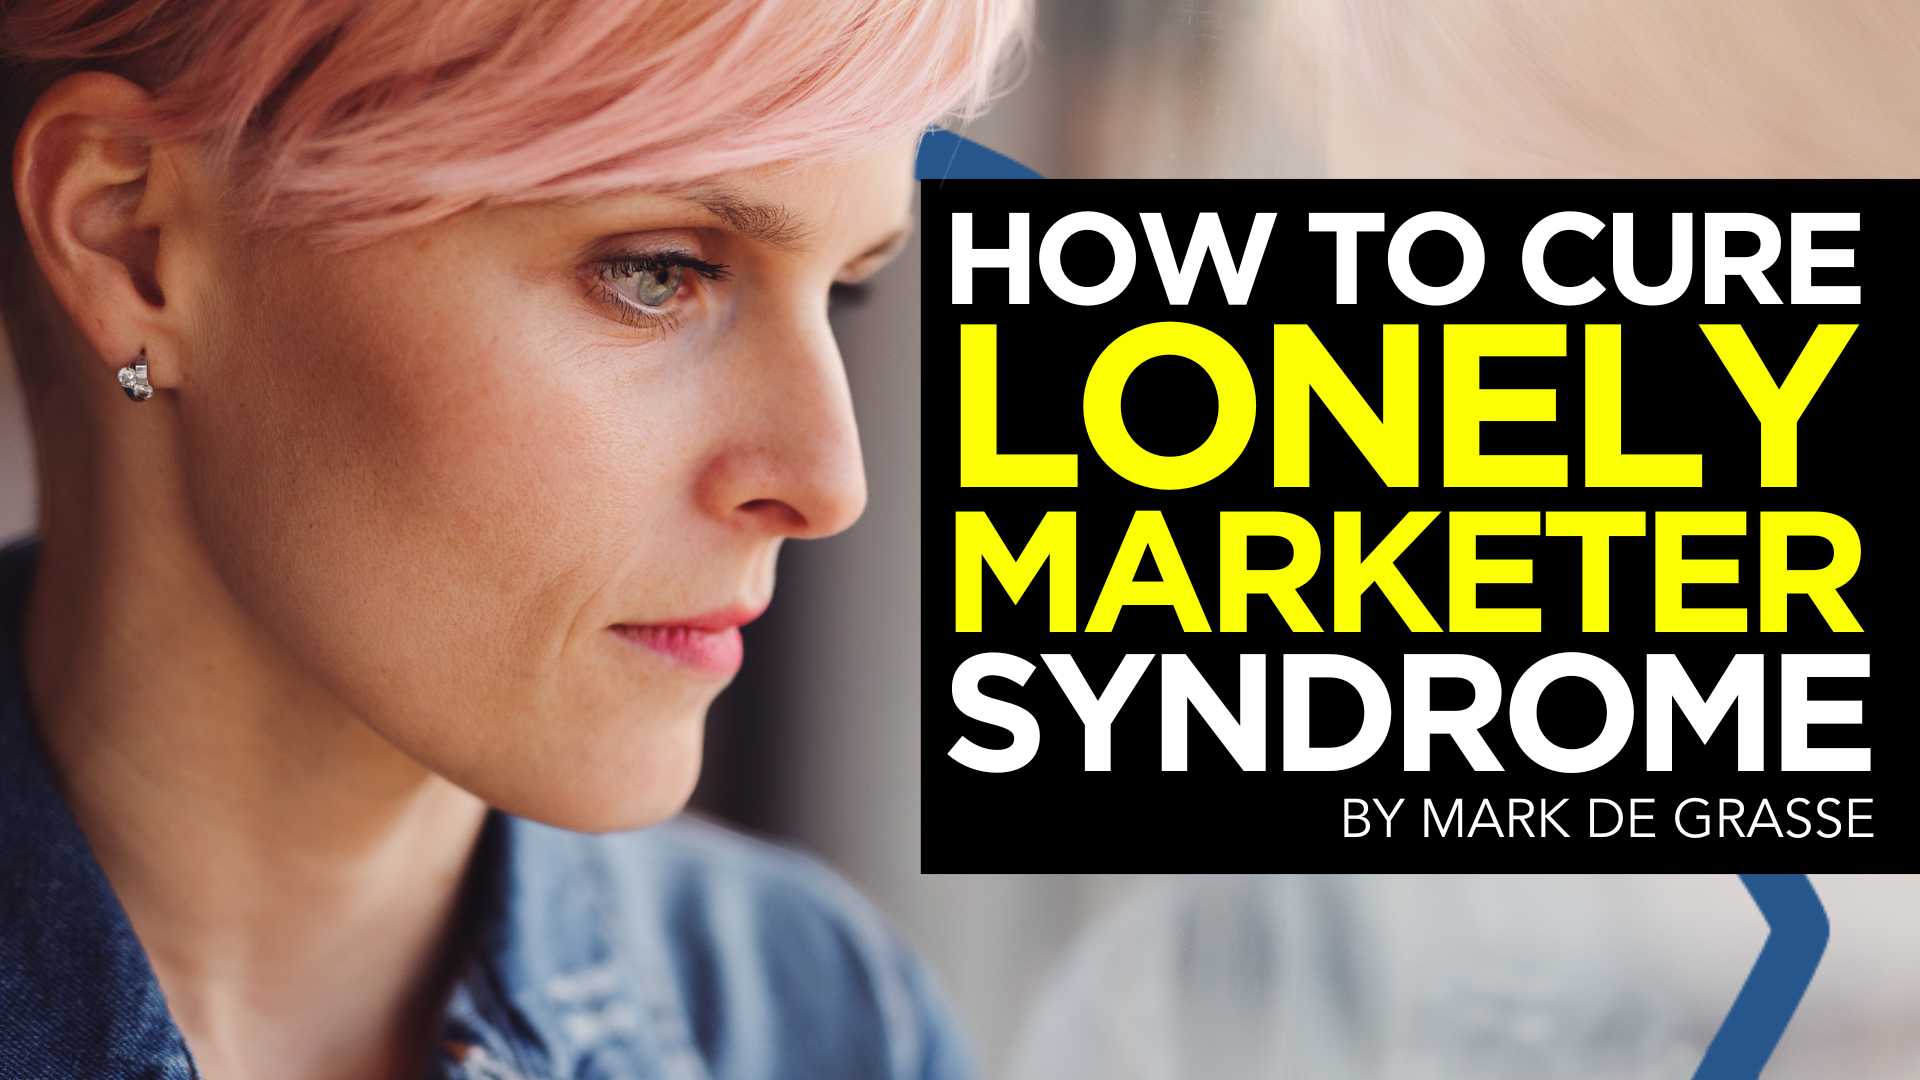 How to Cure "Lonely Marketer Syndrome"